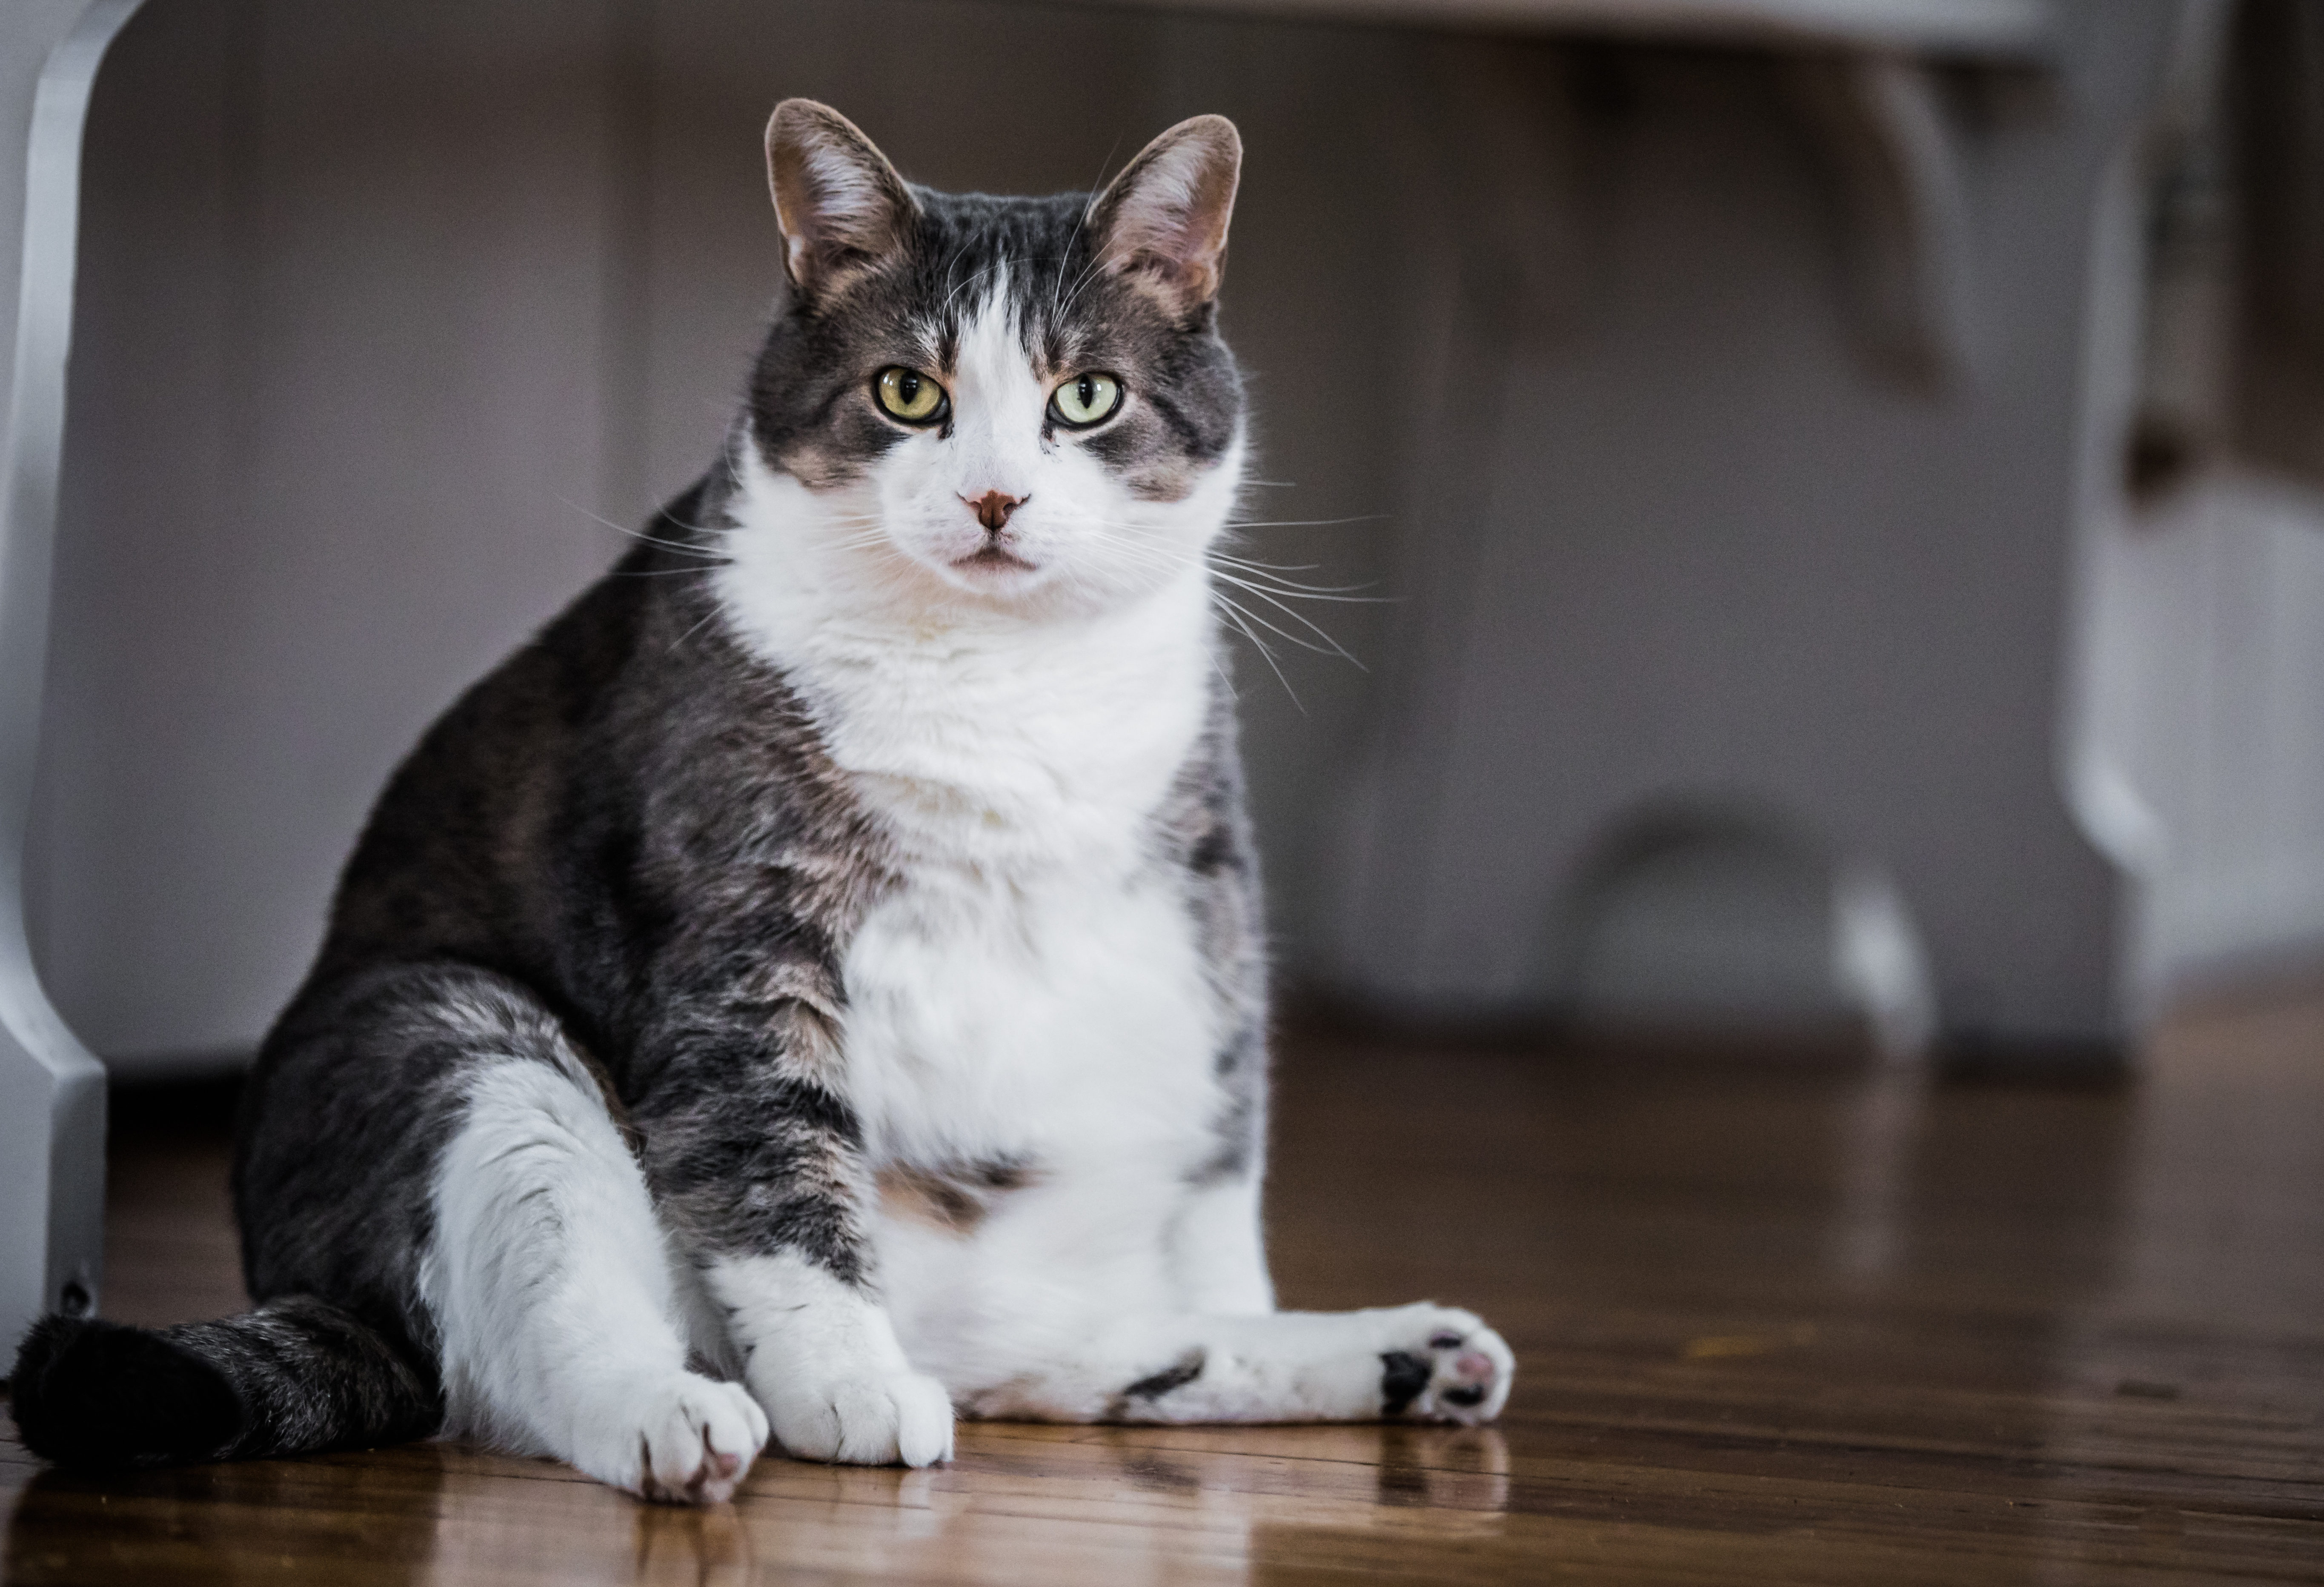 Fat Cats: New Study Finds Felines Are Getting Chubbier. Photo by Shutterstock.